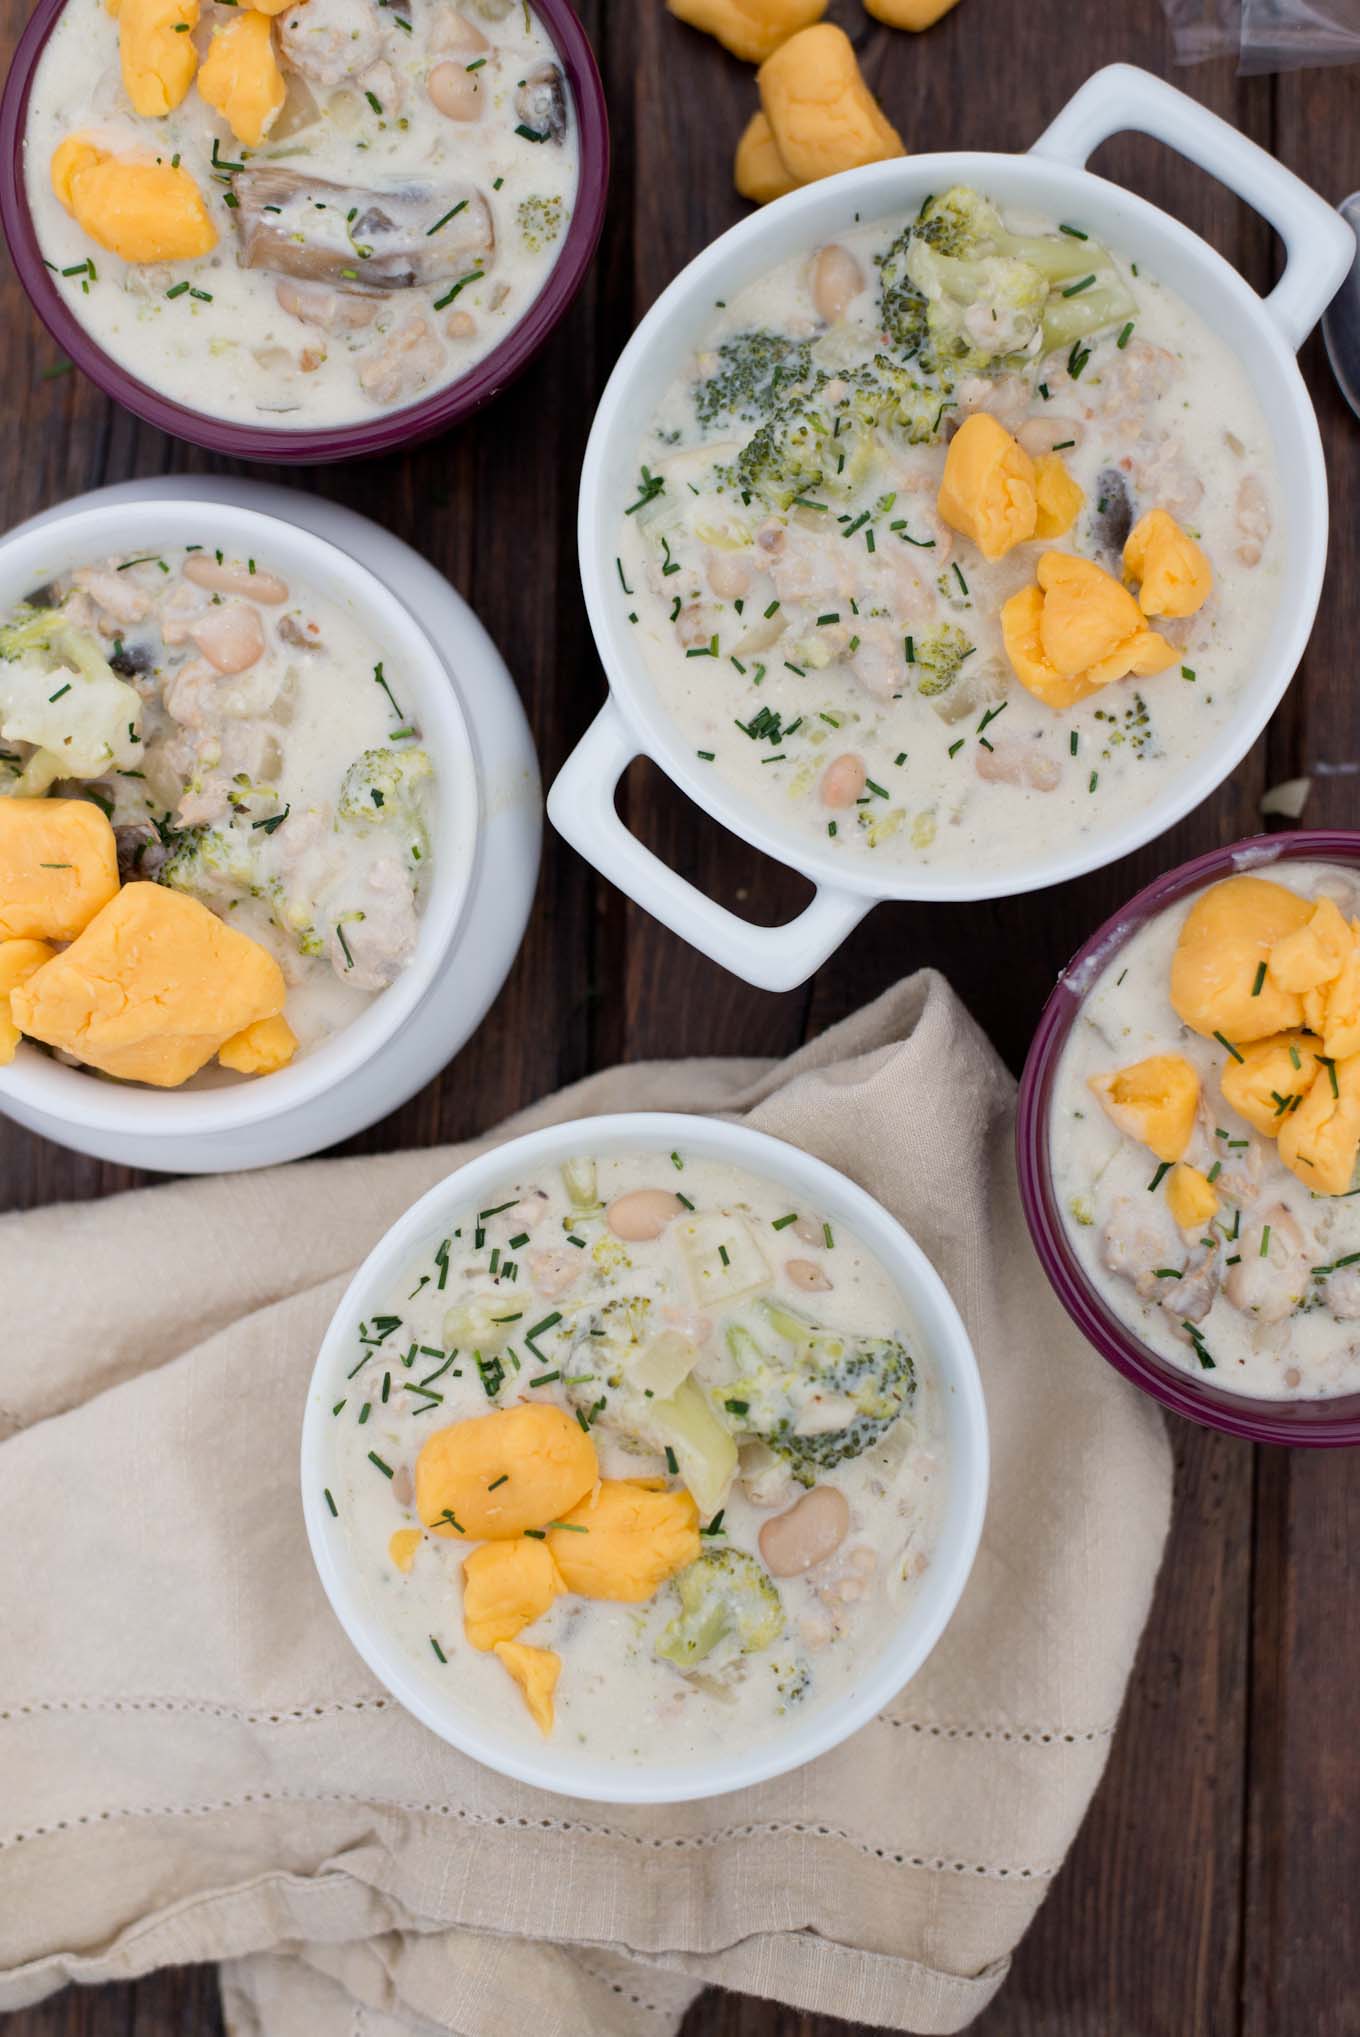 Creamy and delicious this healthified version of broccoli cheddar soup has half the cheese and extra protein.